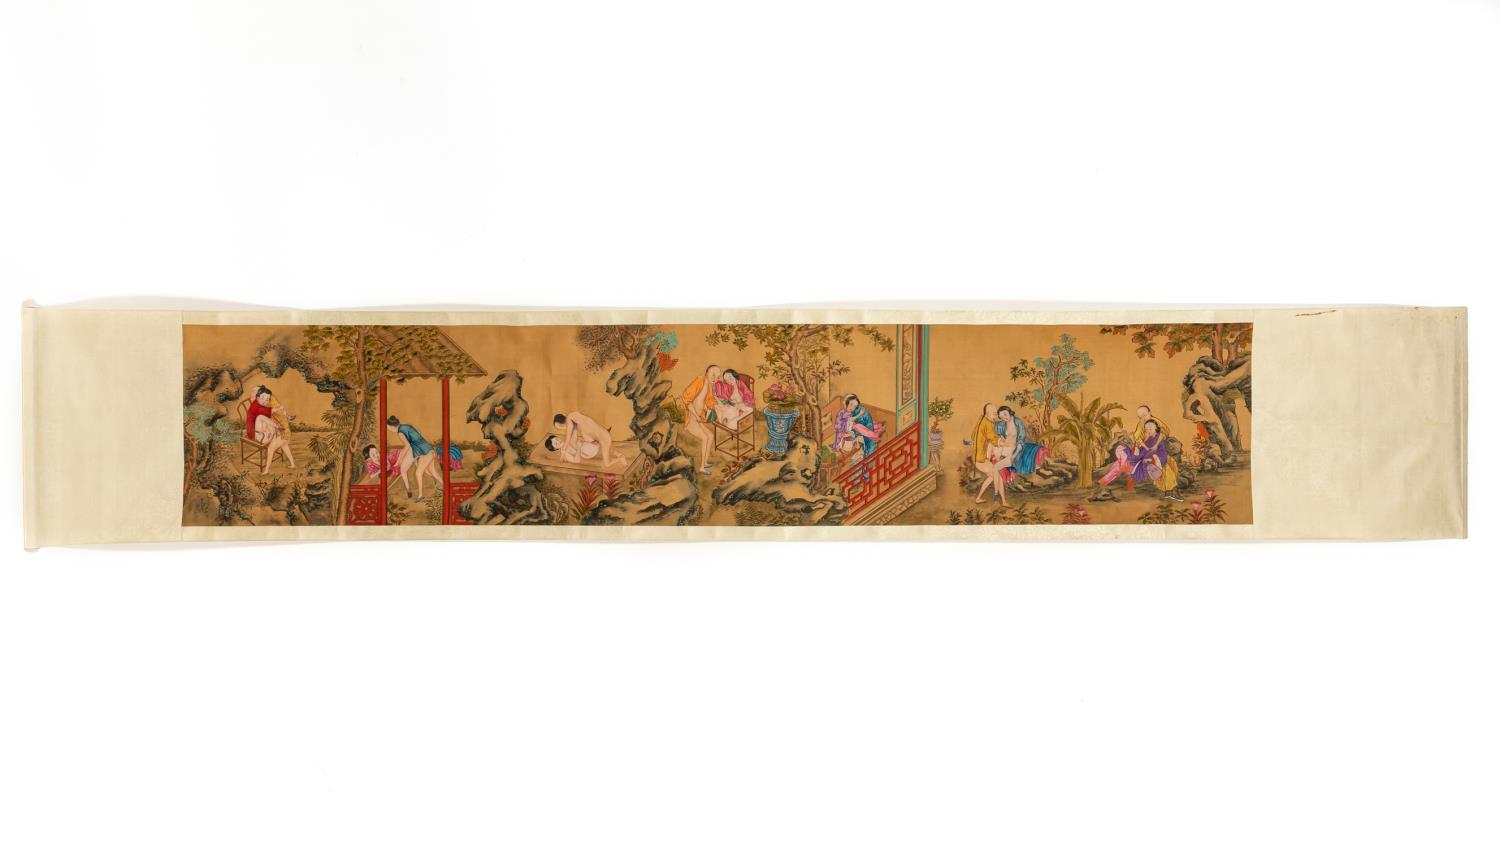 CHINESE EROTIC PAINTED SCROLL ON 35d815